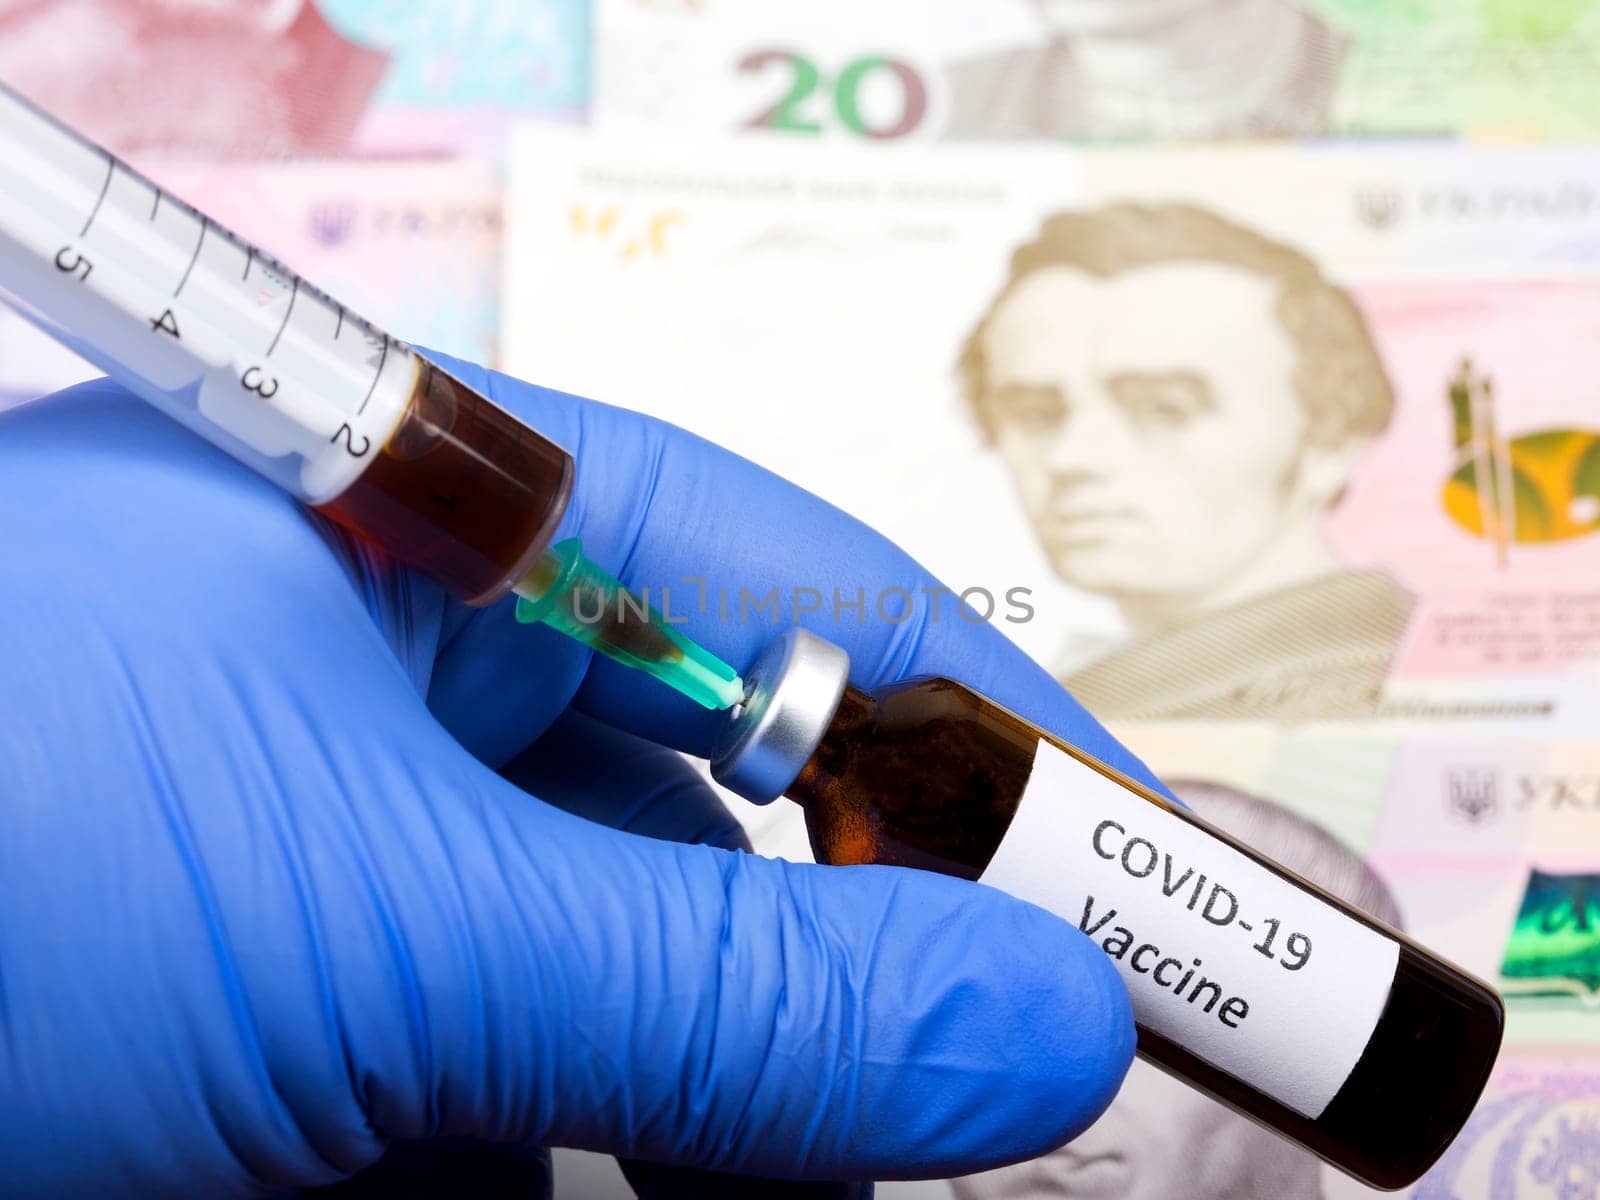 Vaccine against Covid-19 on the background of Ukrainian money by johan10